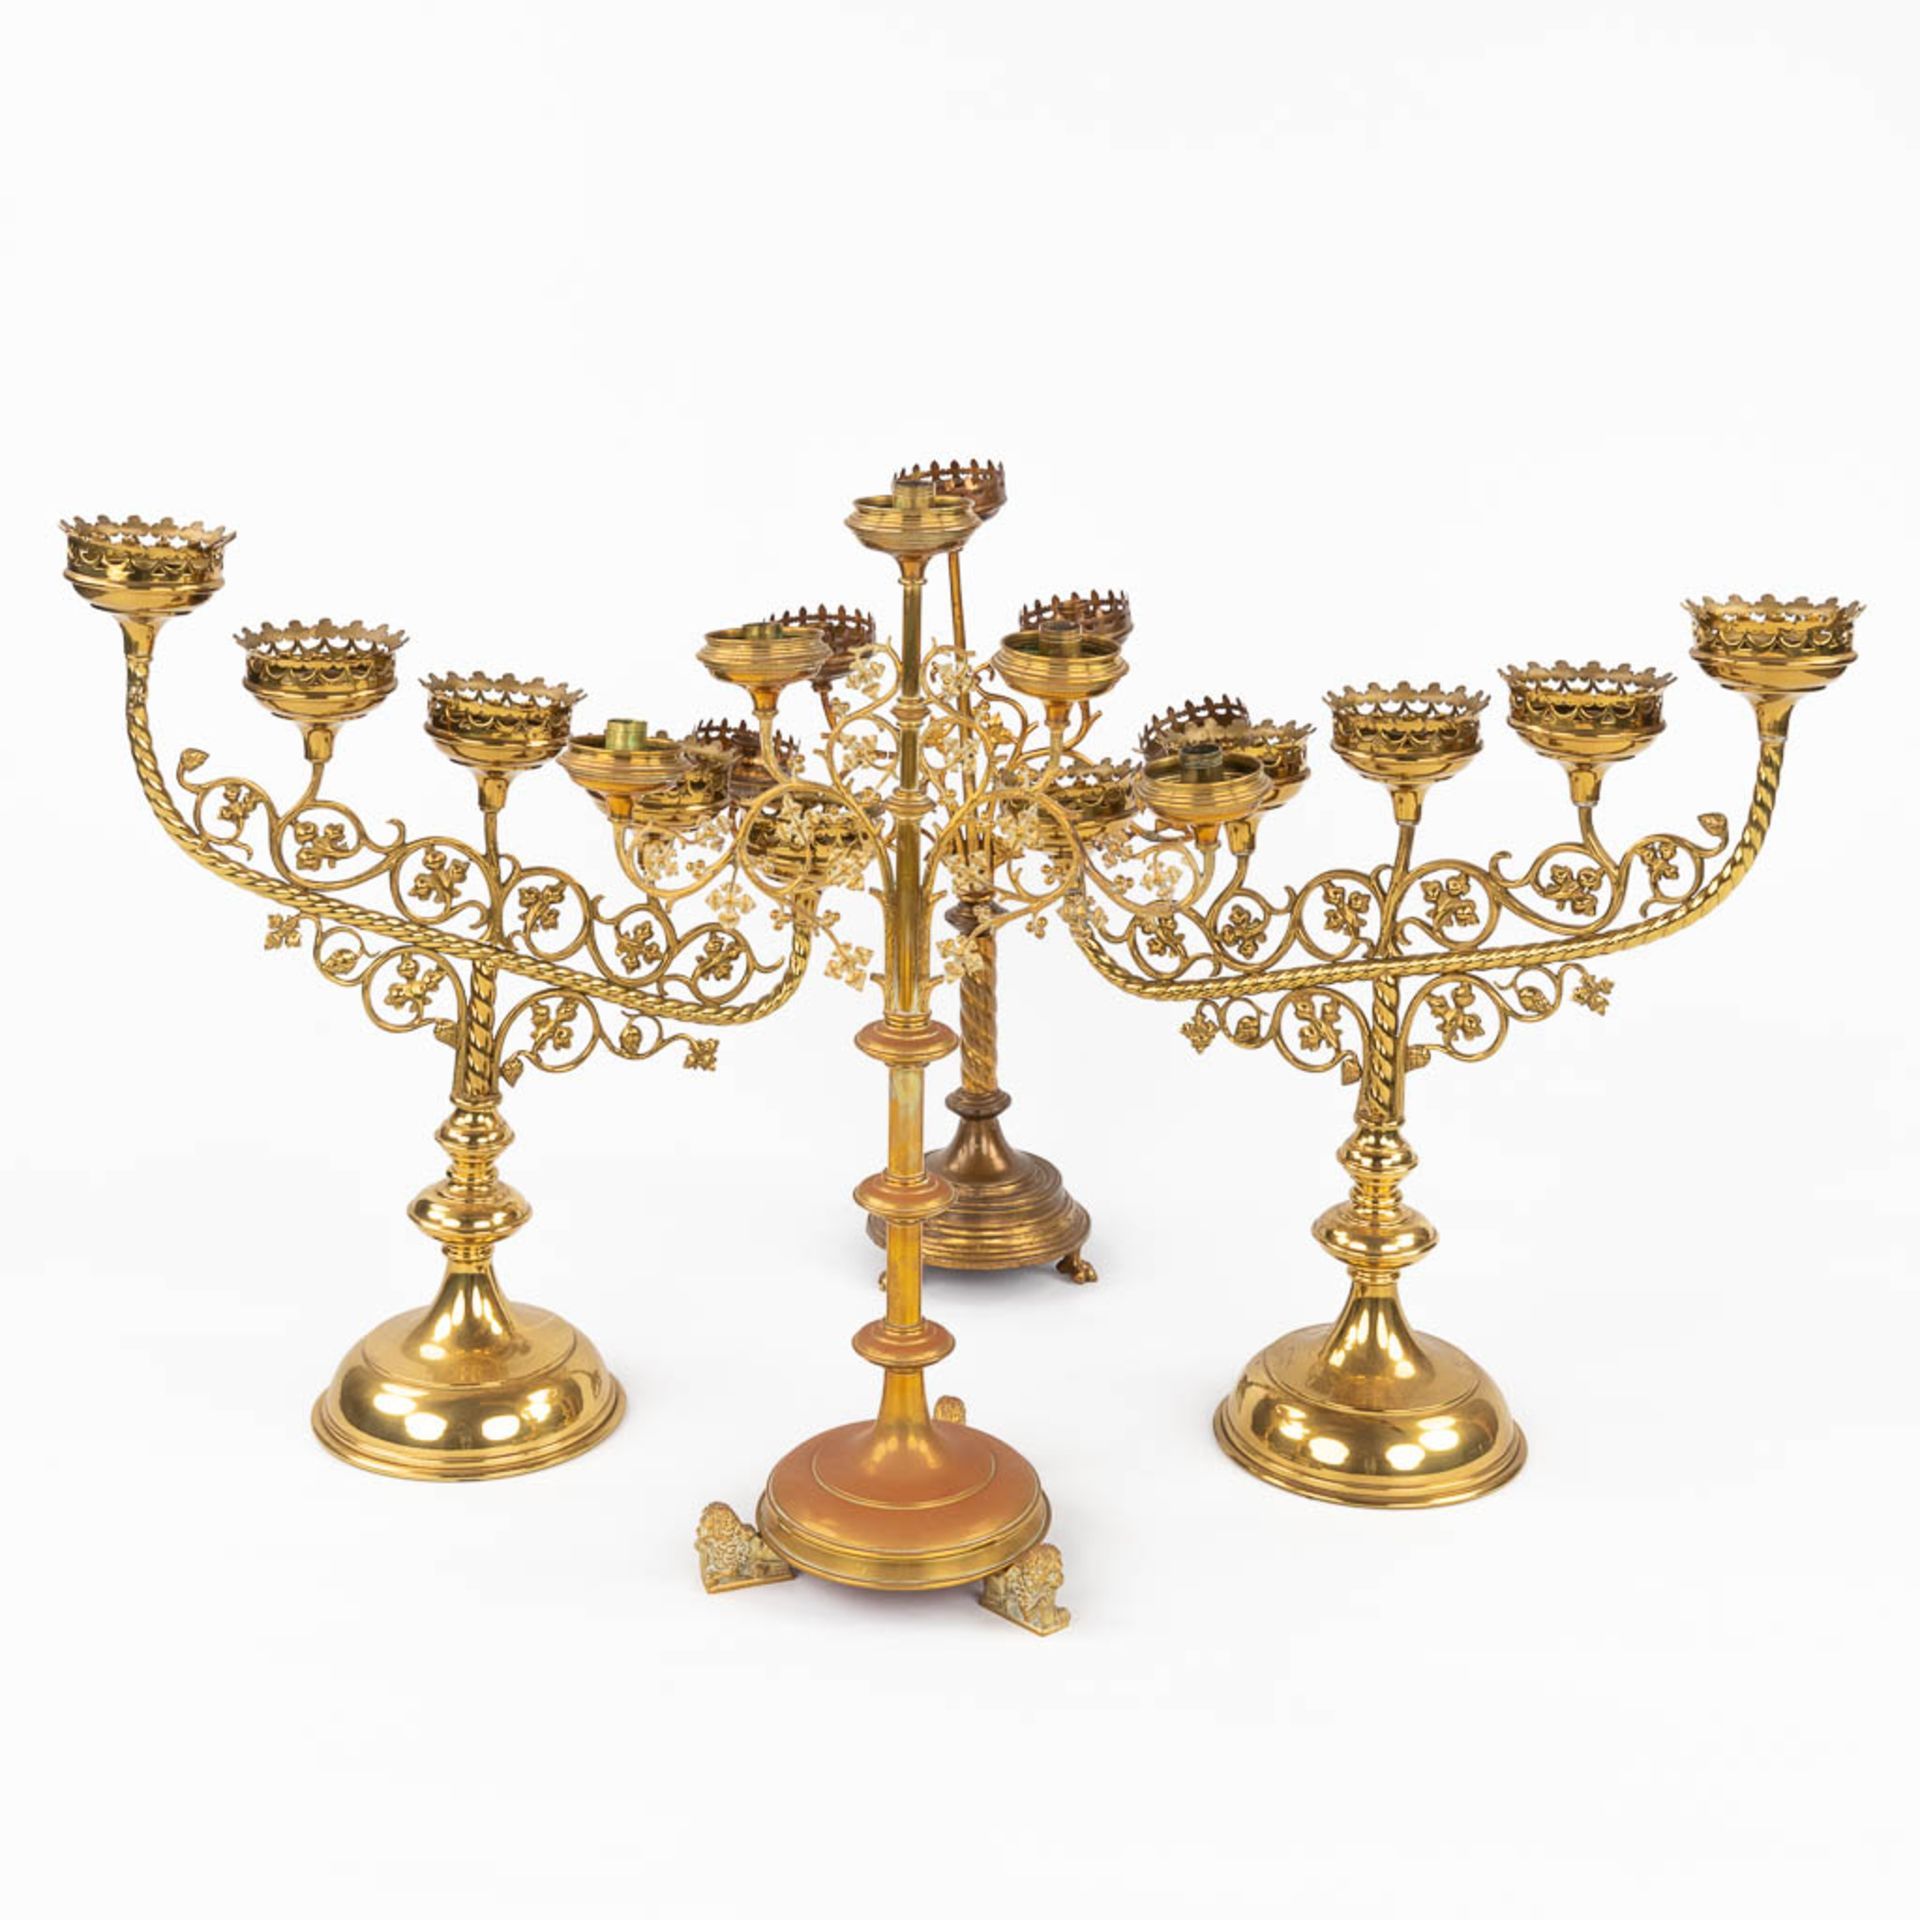 Four Church candlesticks, bronze in a gothic revival style. A pair and two singles. (D:18 x W:51 x H